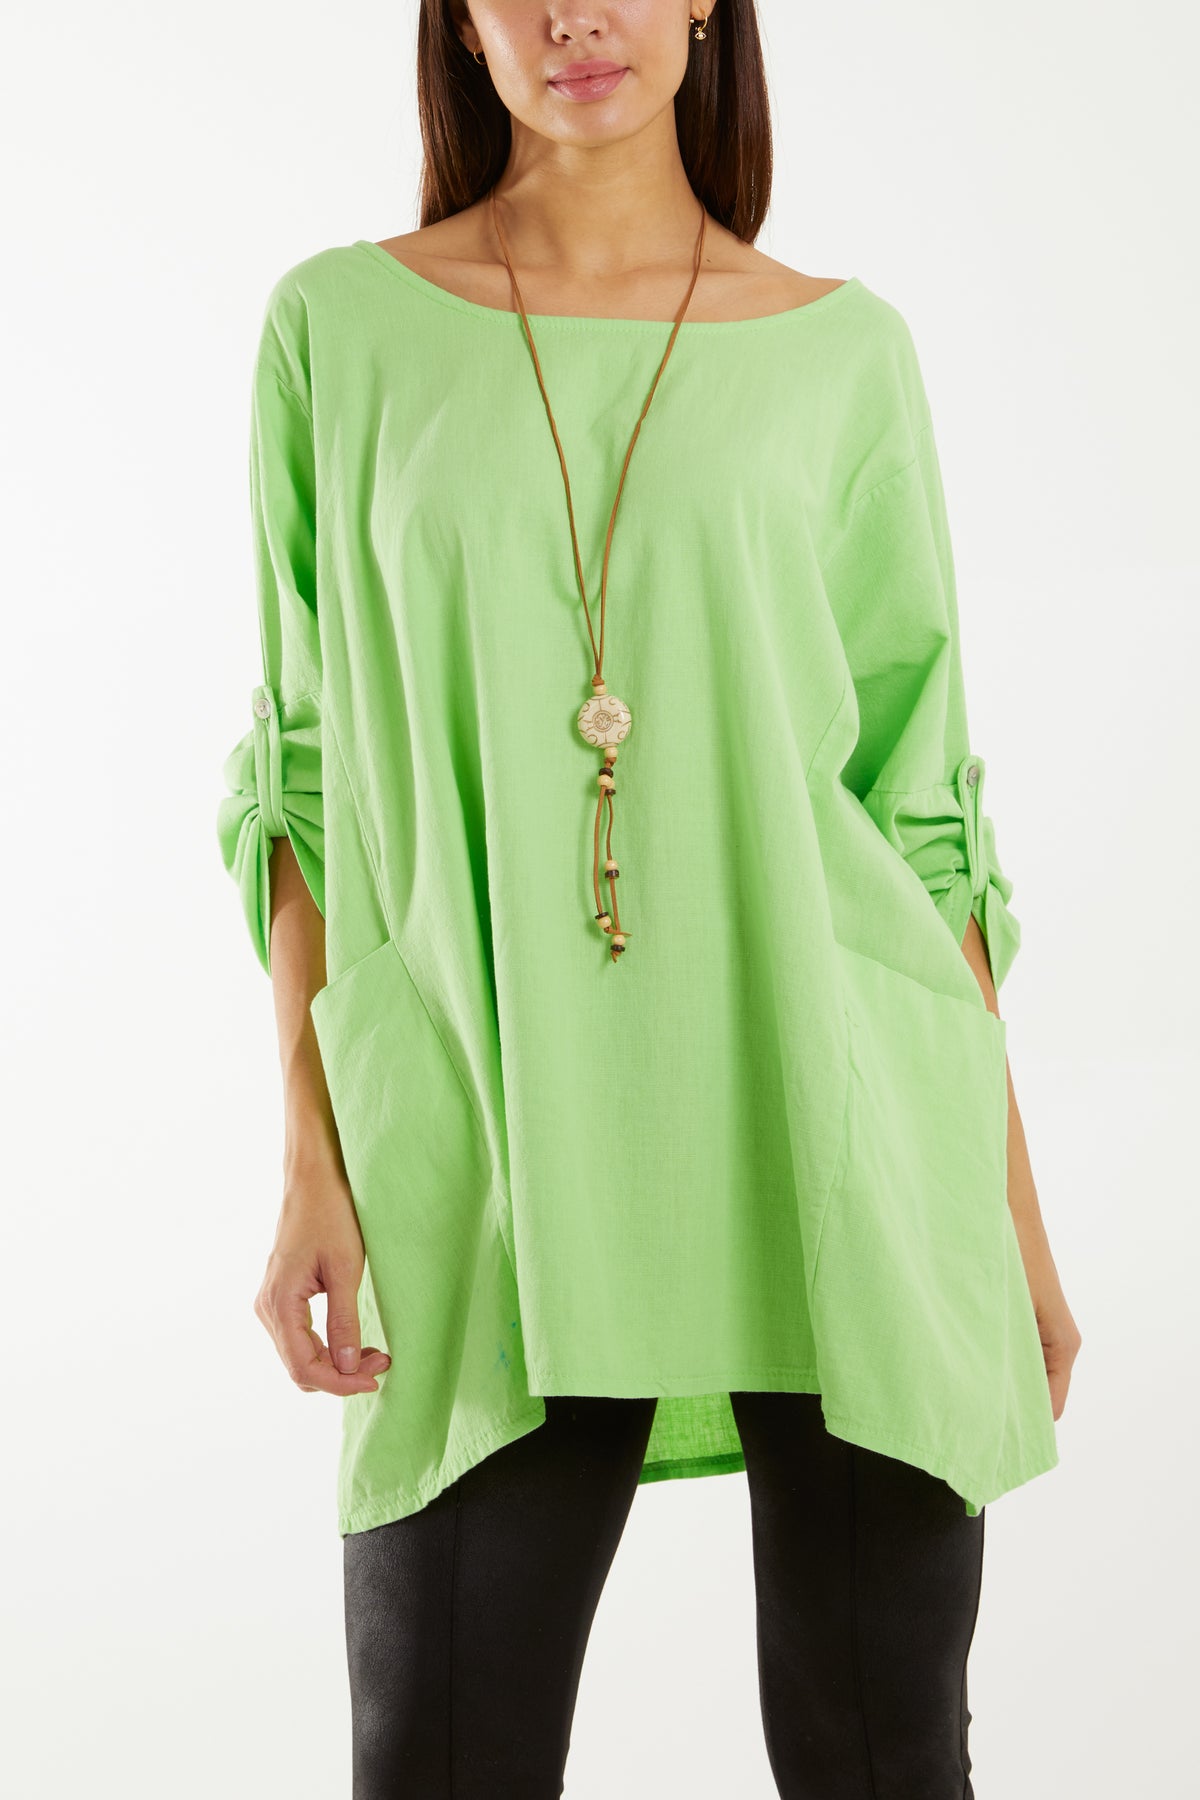 Necklace Relaxed Fit Blouse with Pockets